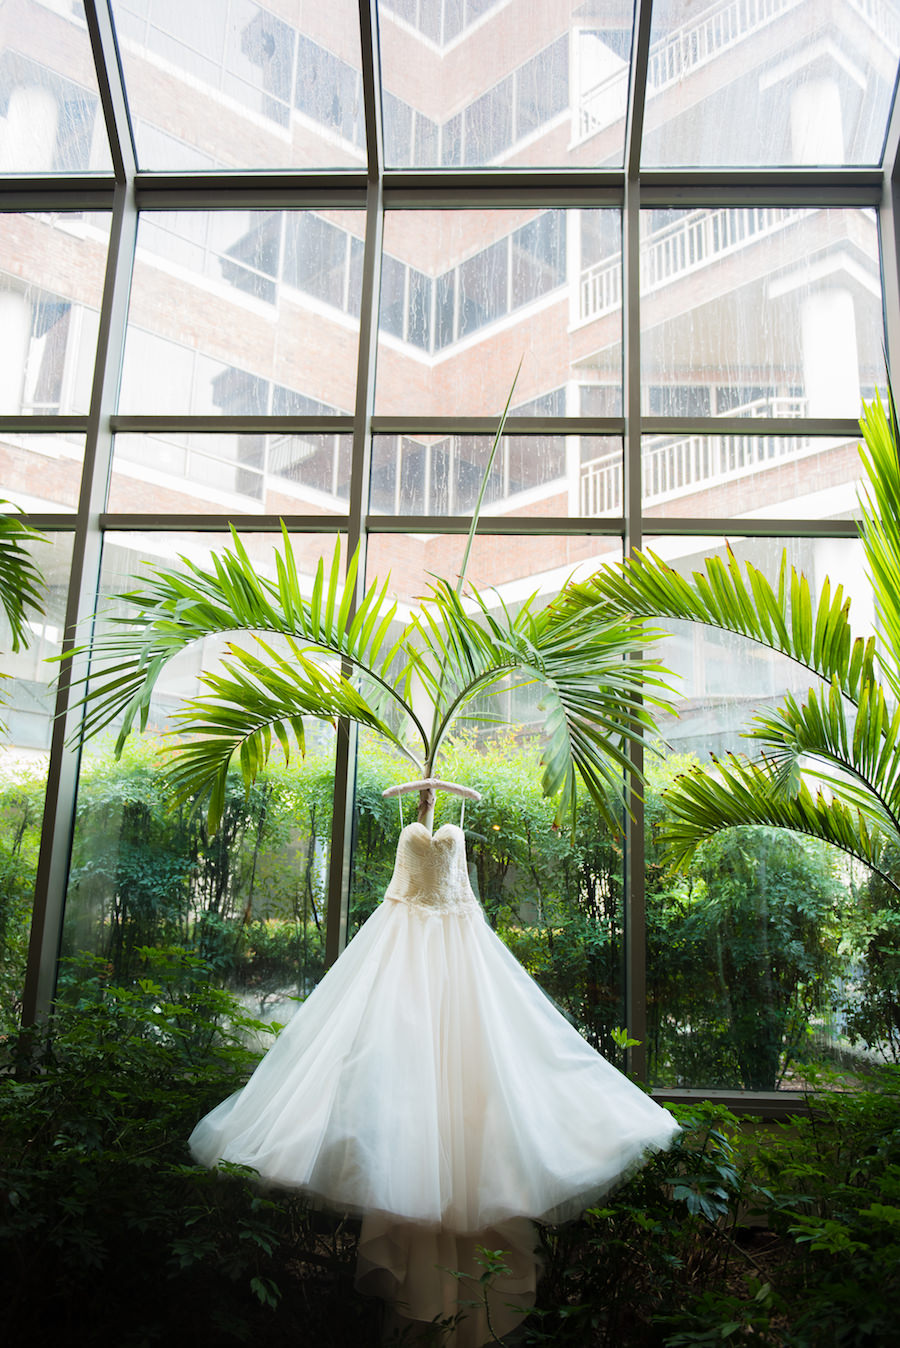 Strapless, Sweetheart, Ivory Chiffon and Tulle Ballgown Wedding Dress | South Tampa Wedding Photographer Kera Photography